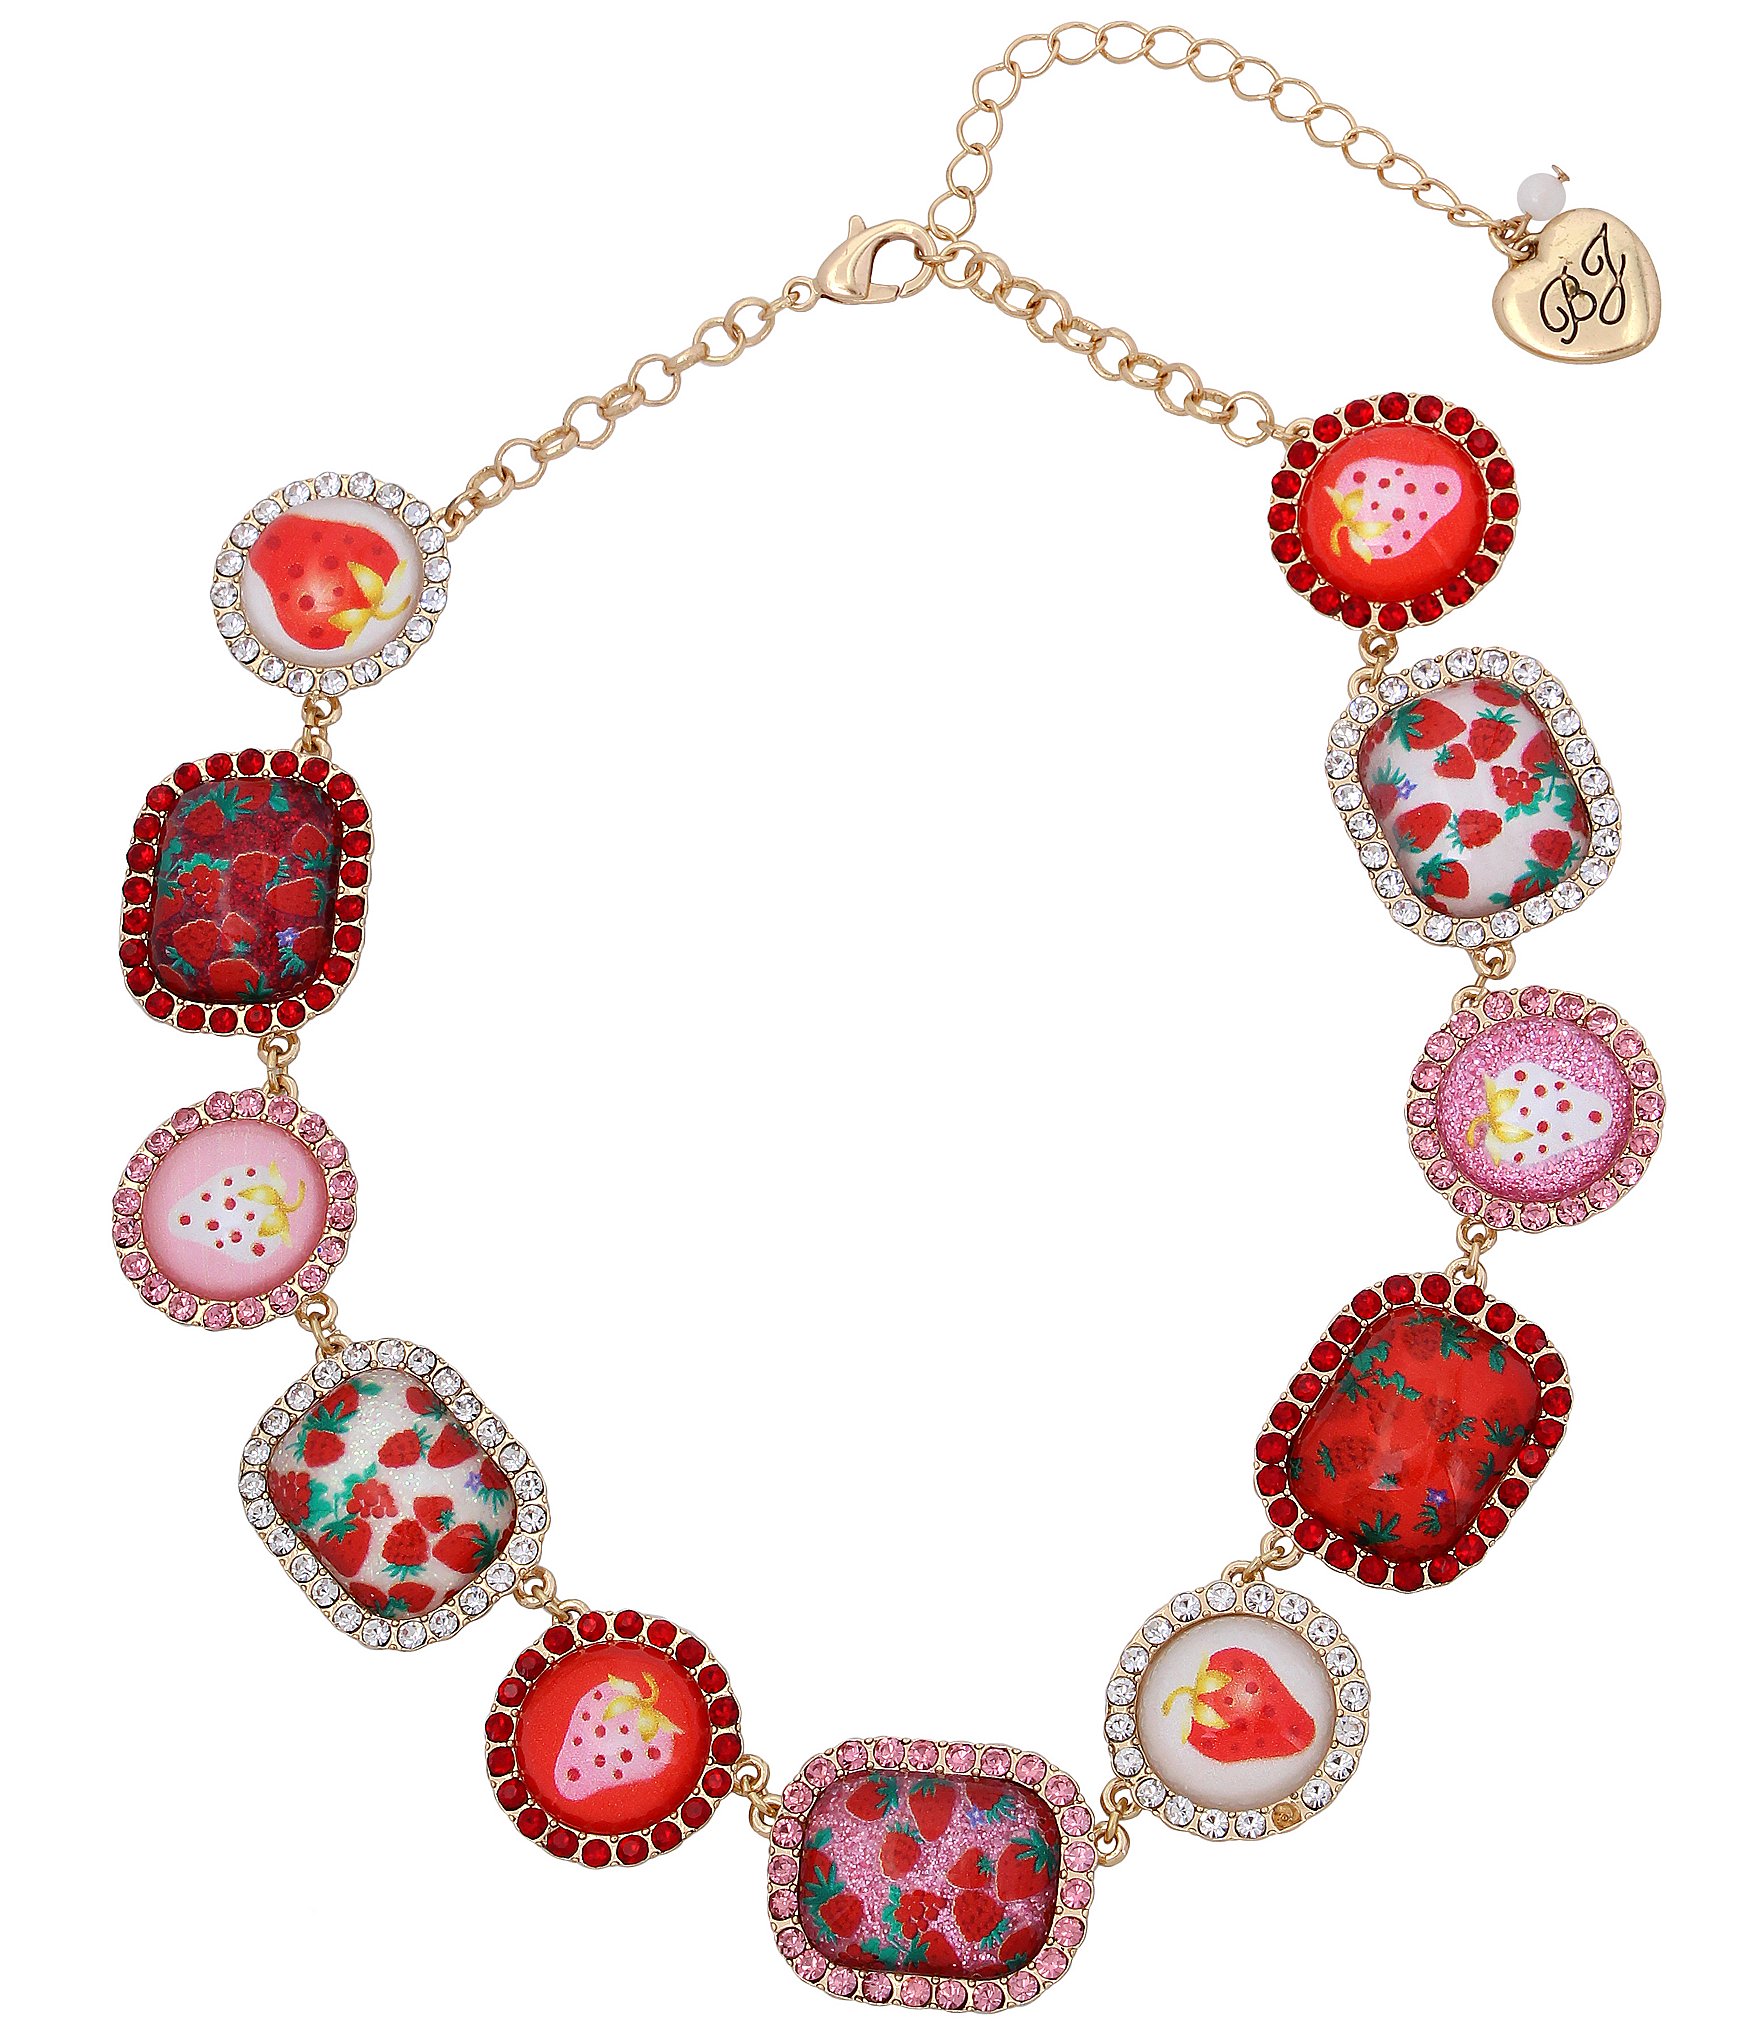 Betsey Johnson Nwt Strawberry Frontal Statement Necklace